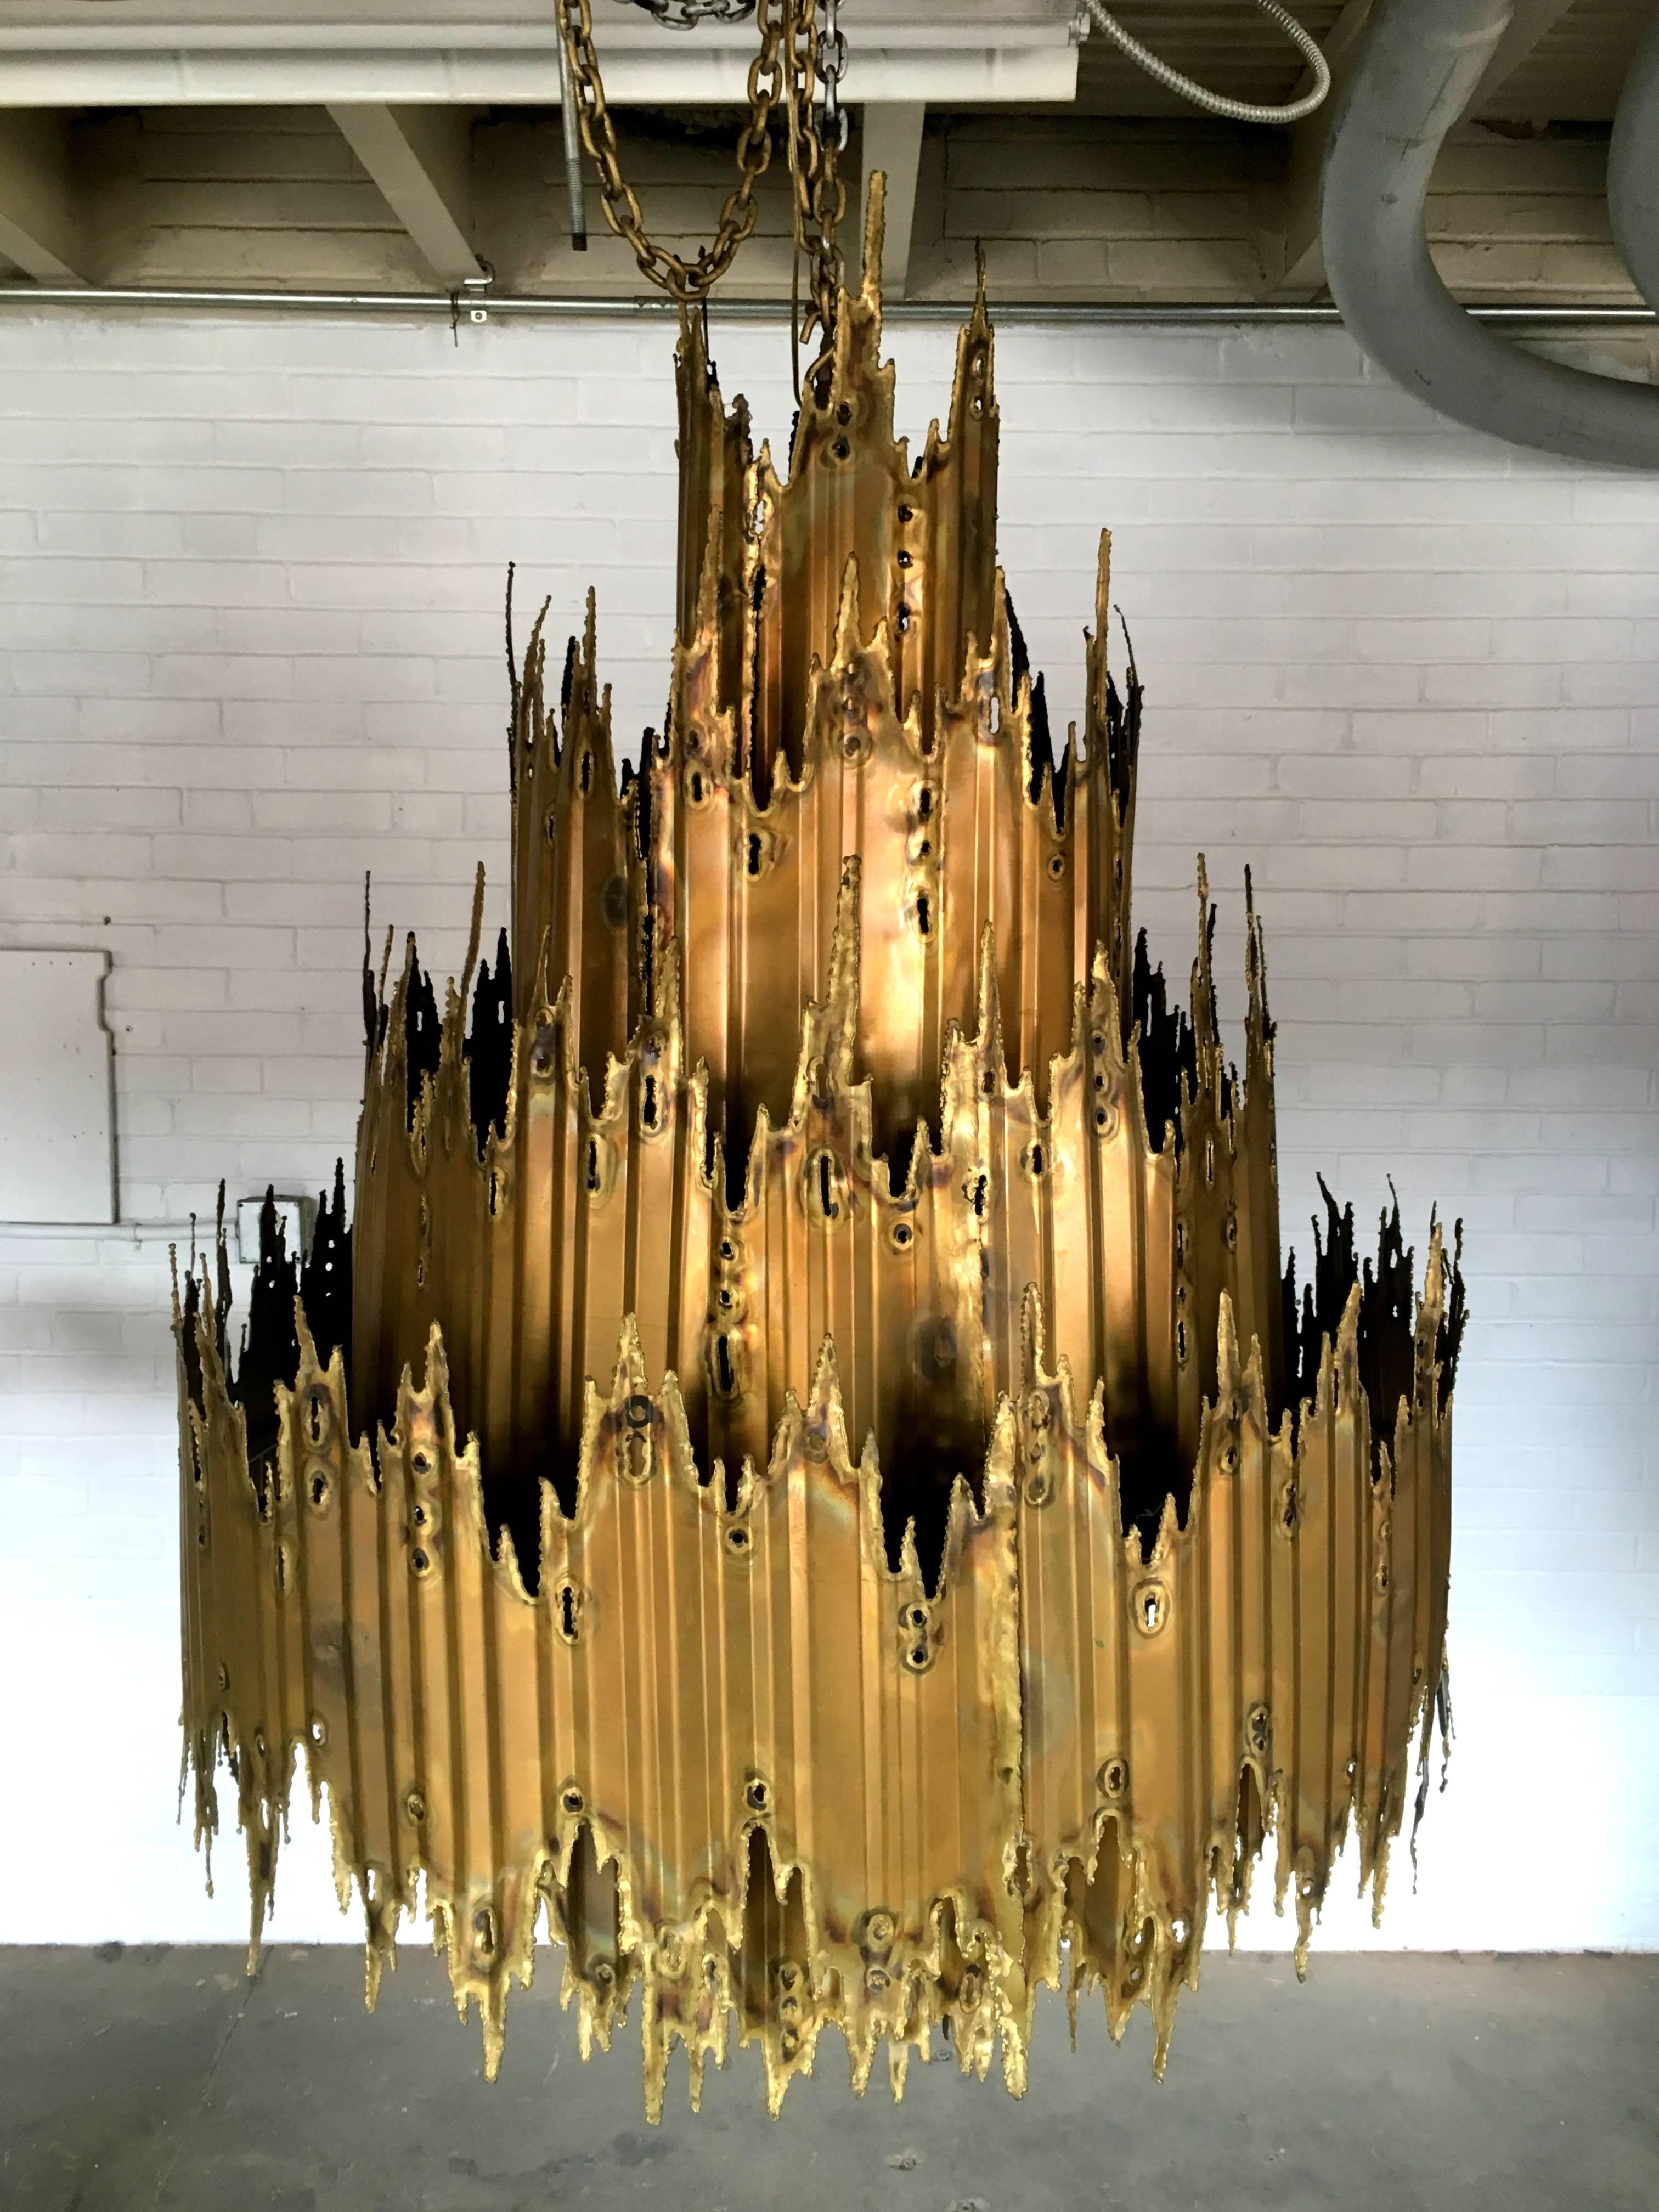 Monumental and massive torch cut brutalist chandelier by Tom Greene for Feldman Lighting.
This is the largest model ever produced at a whopping 60" from top to bottom. And 40" across!
Incredible condition!